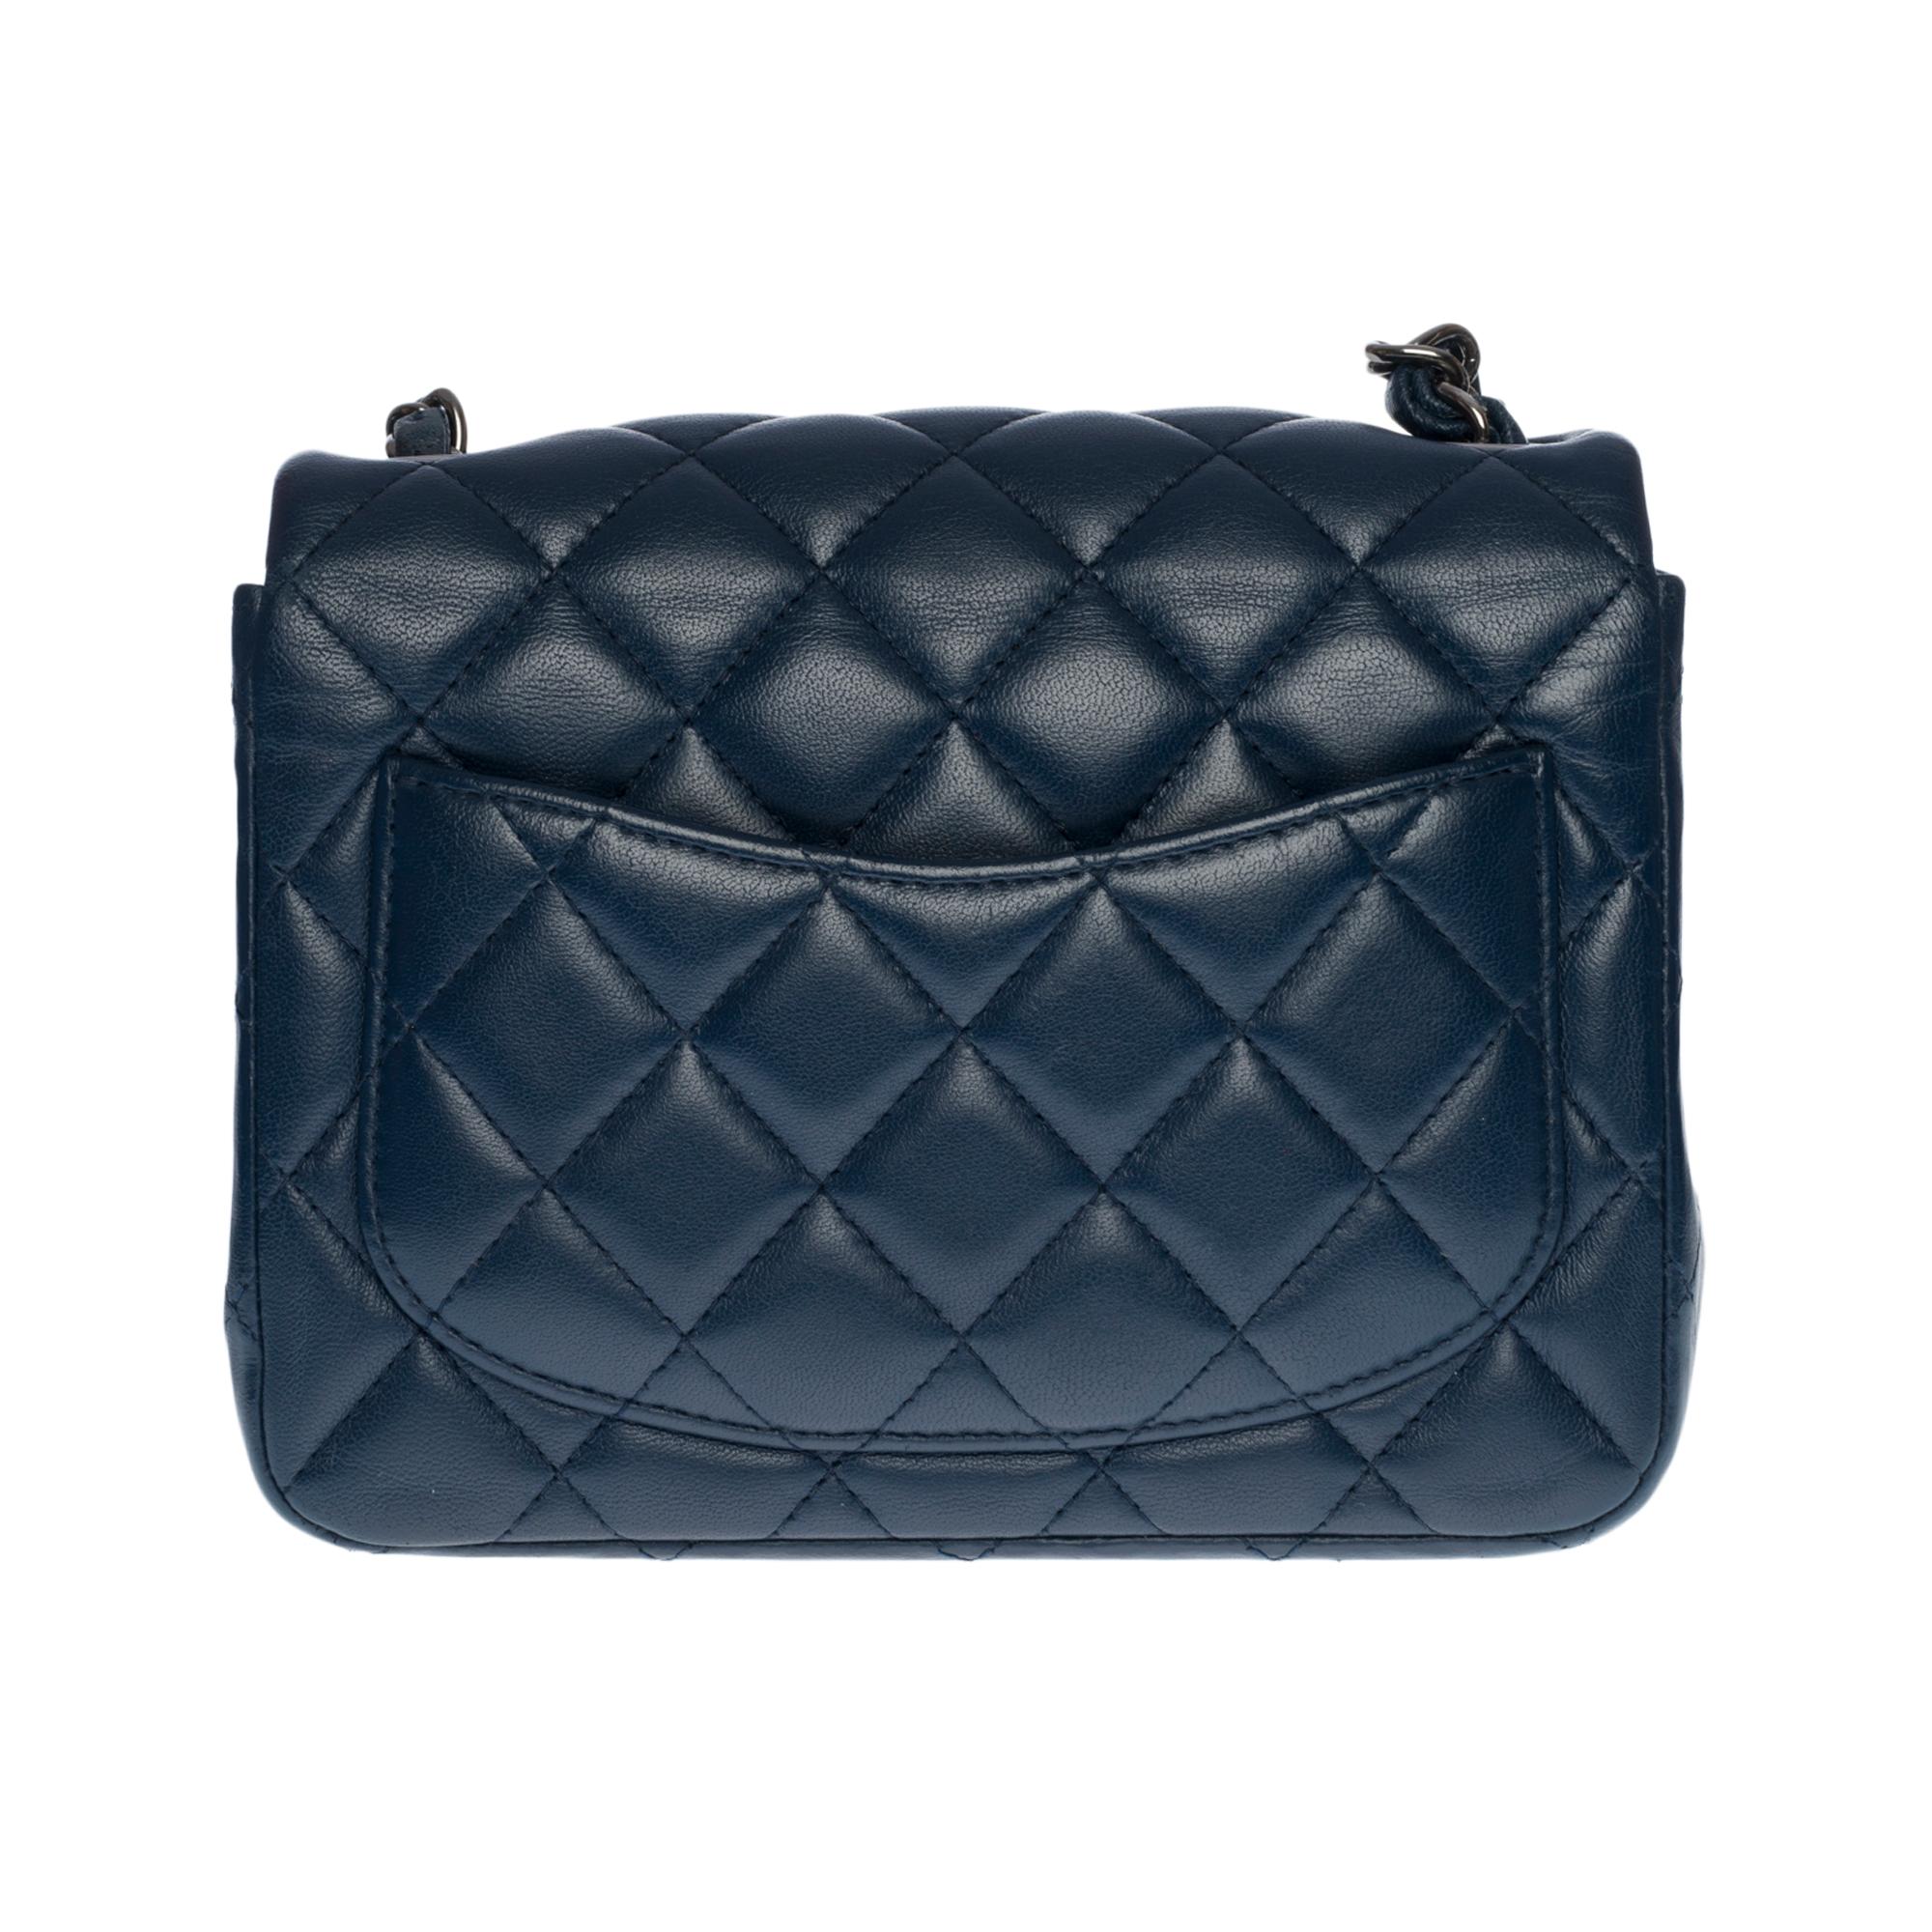 Stunning Chanel Mini Timeless Flap bag in dark blue quilted leather, silver metal hardware, a silver metal chain interlaced with dark blue leather for a shoulder and crossbody support

Silver metal flap closure
A patch pocket on the back of the